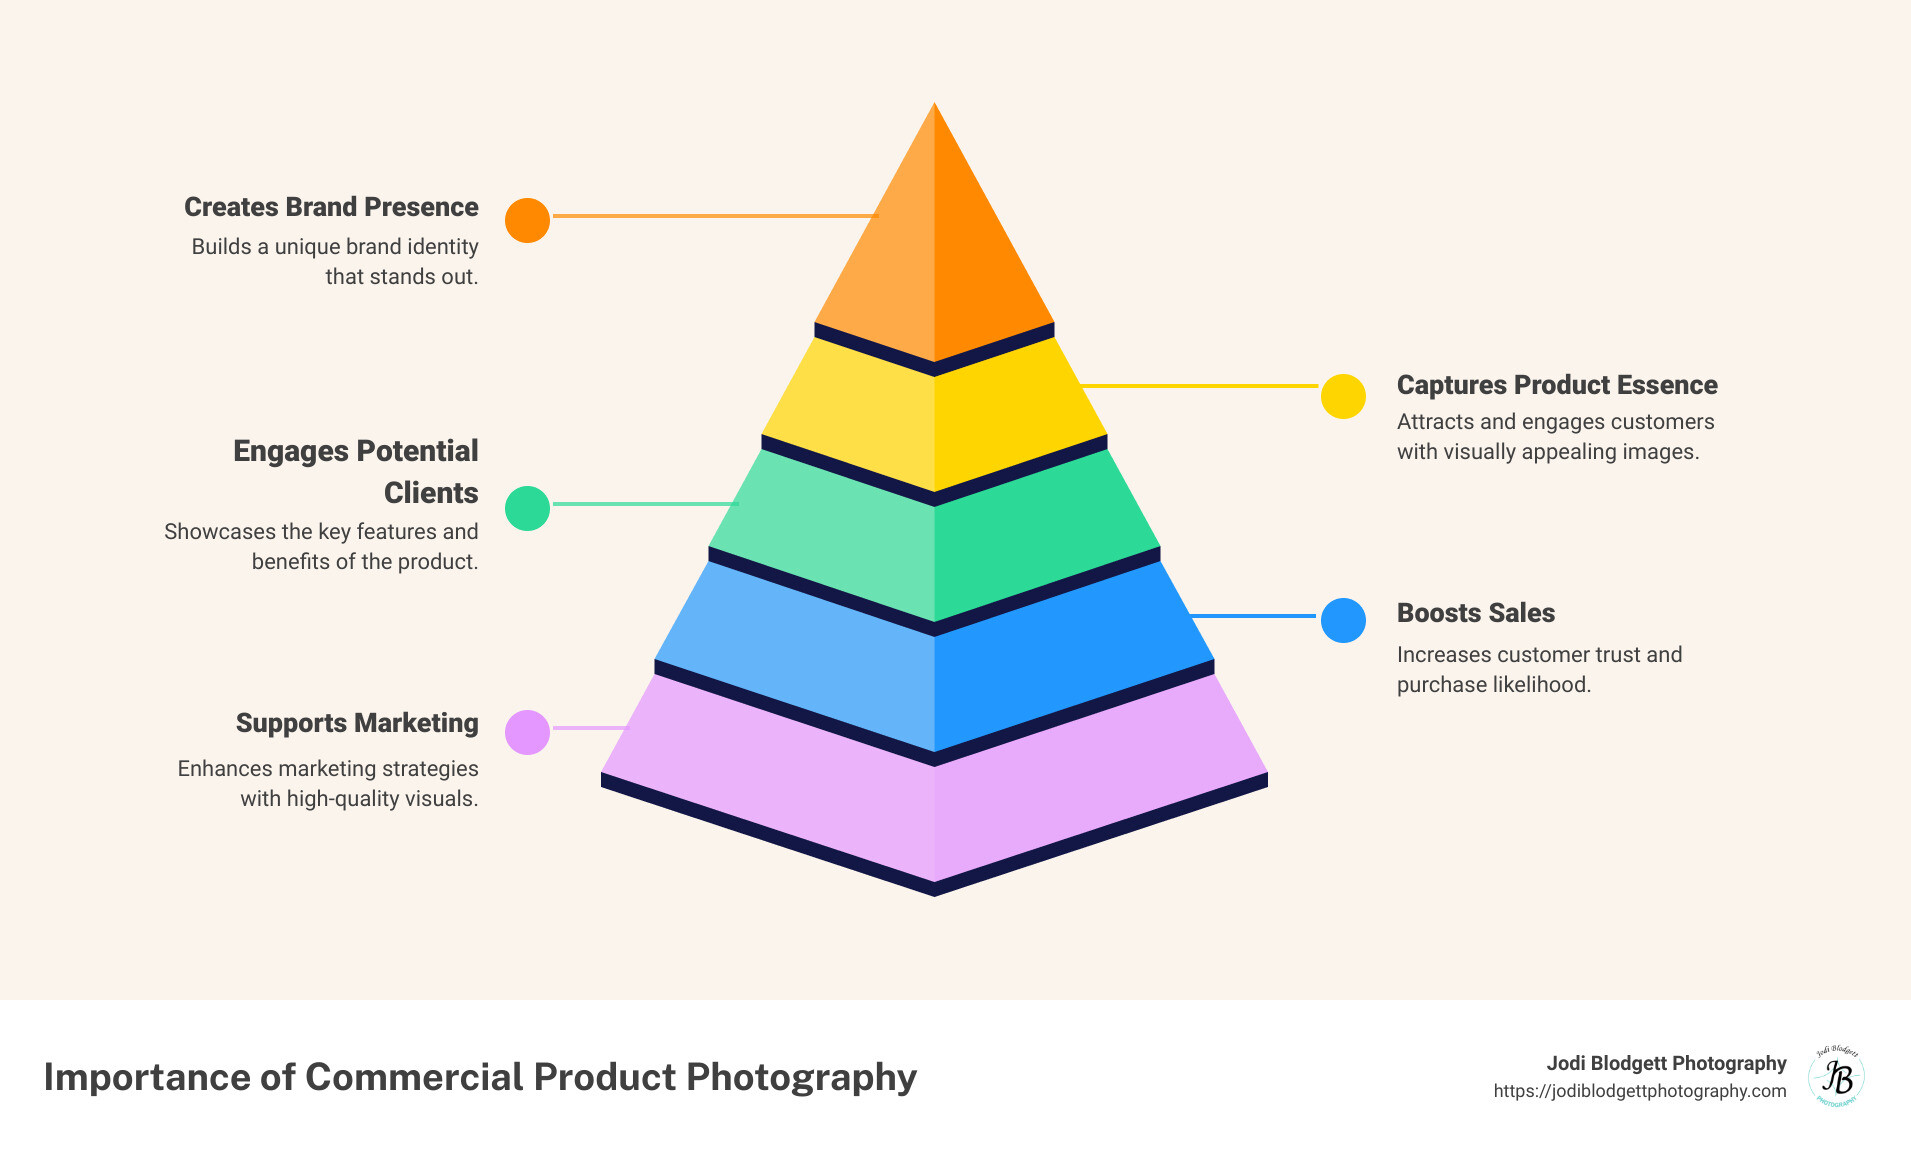 importance of commercial product photography - commercial product photography infographic pyramid-hierarchy-5-steps